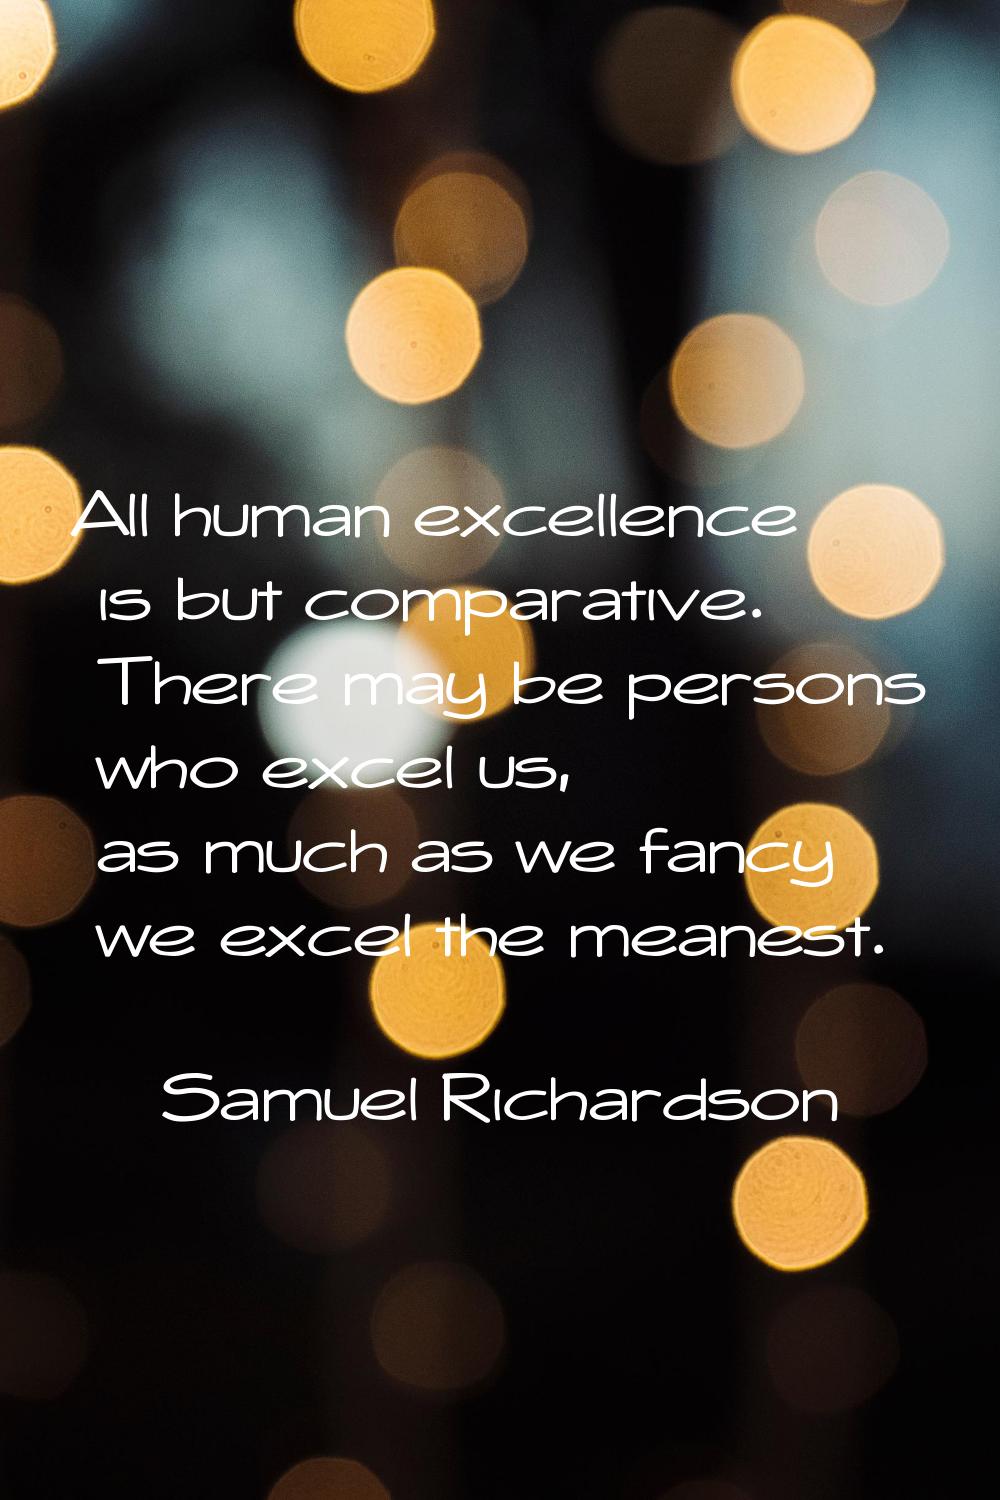 All human excellence is but comparative. There may be persons who excel us, as much as we fancy we 